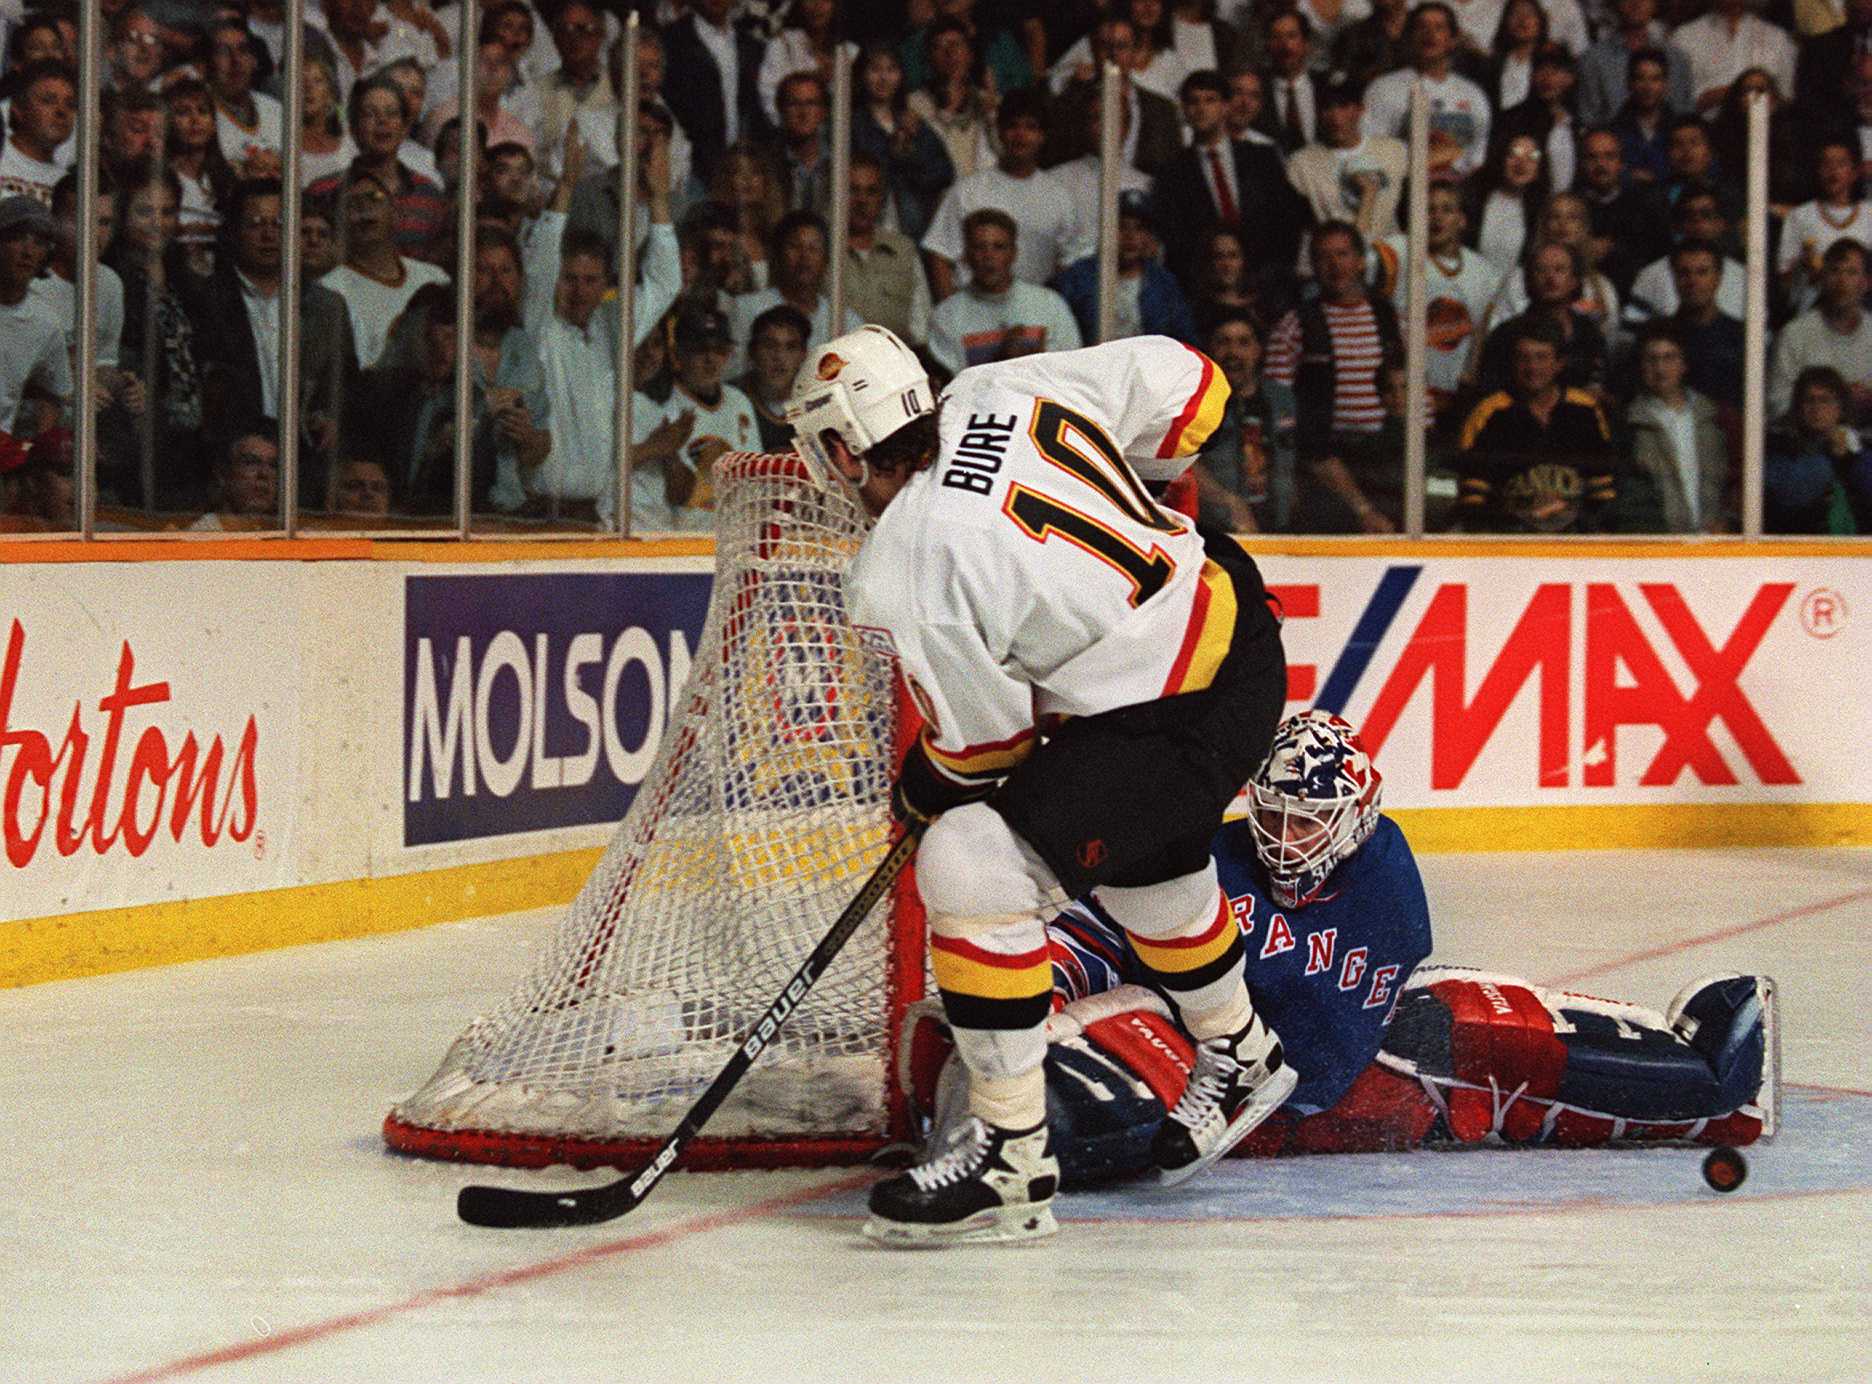 Canucks' 1994 team to be re-united at Heritage Classic